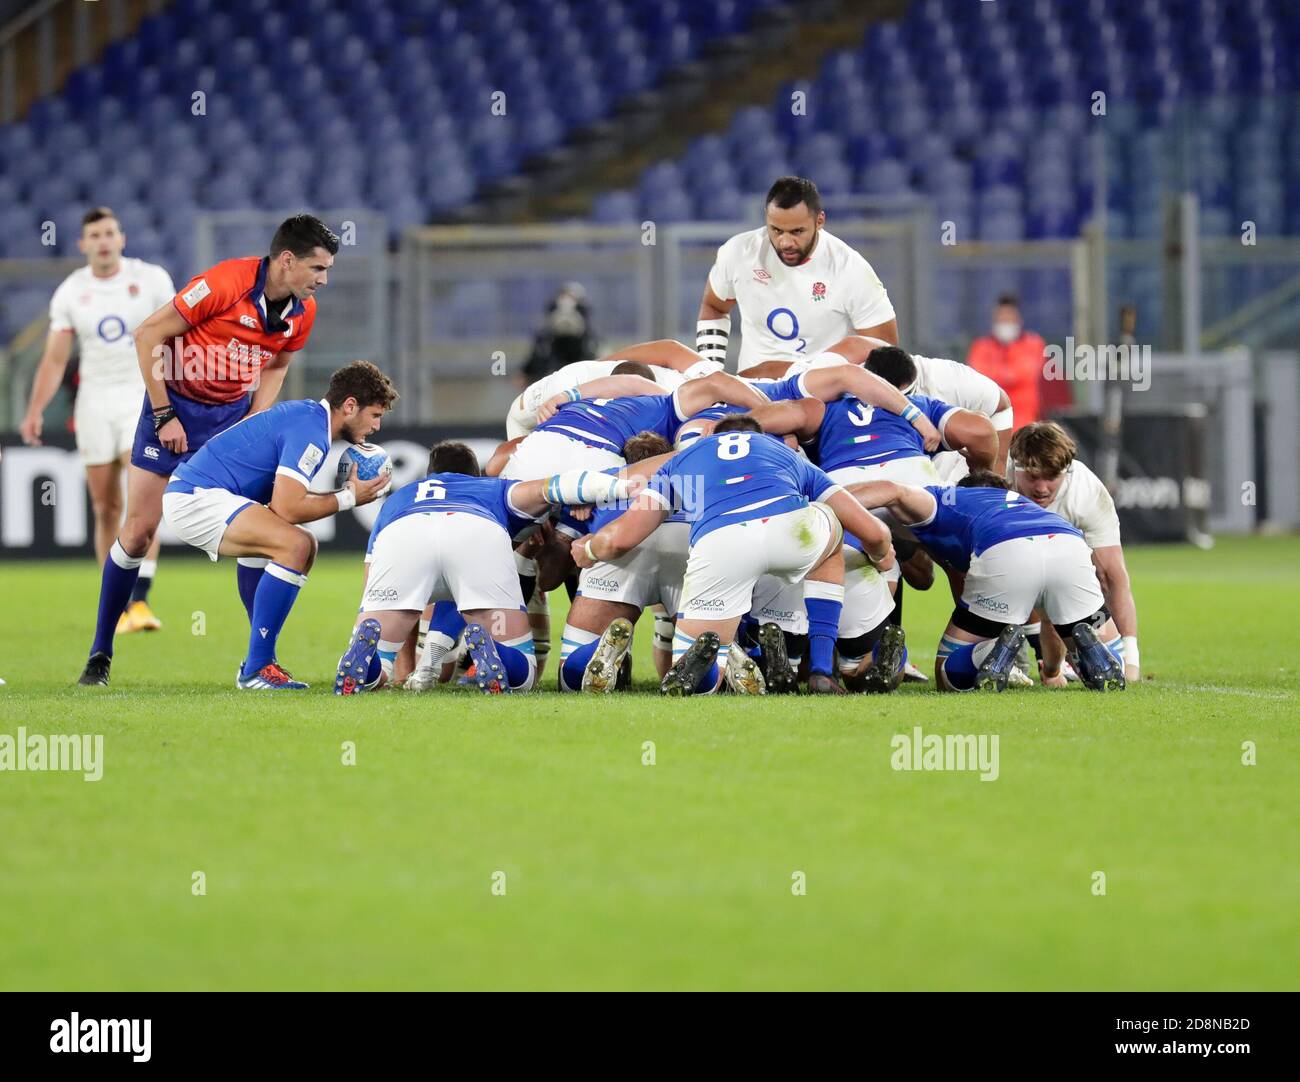 Rome, Italy. 31st Oct, 2020. rome, Italy, Stadio Olimpico, 31 Oct 2020, scrum Italy during Italy vs England - Rugby Six Nations match - Credit: LM/Luigi Mariani Credit: Luigi Mariani/LPS/ZUMA Wire/Alamy Live News Stock Photo